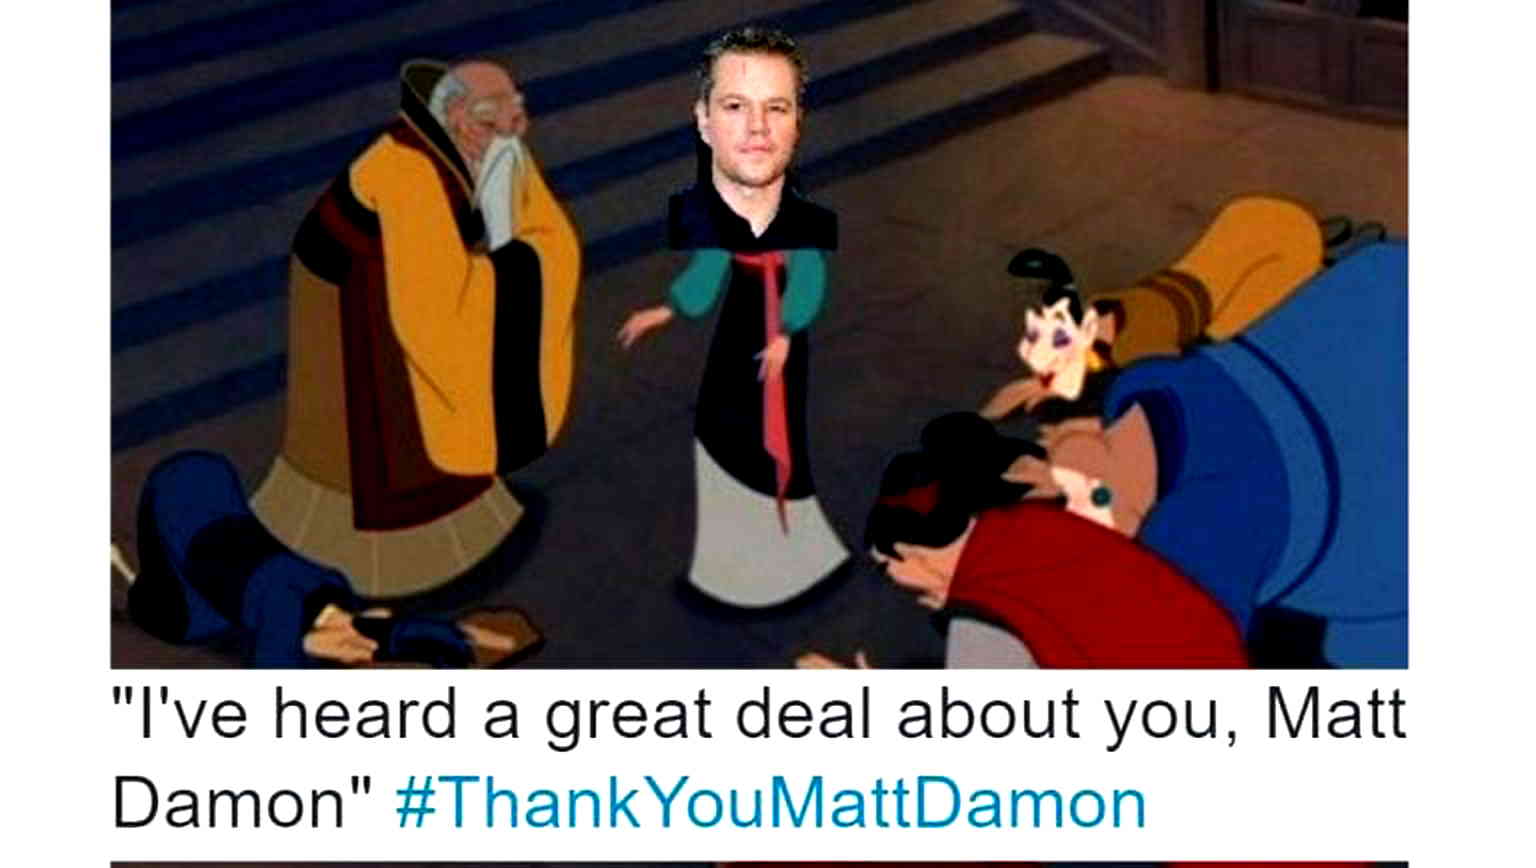 Asian Americans Are Trolling the Crap Out of Matt Damon on Twitter